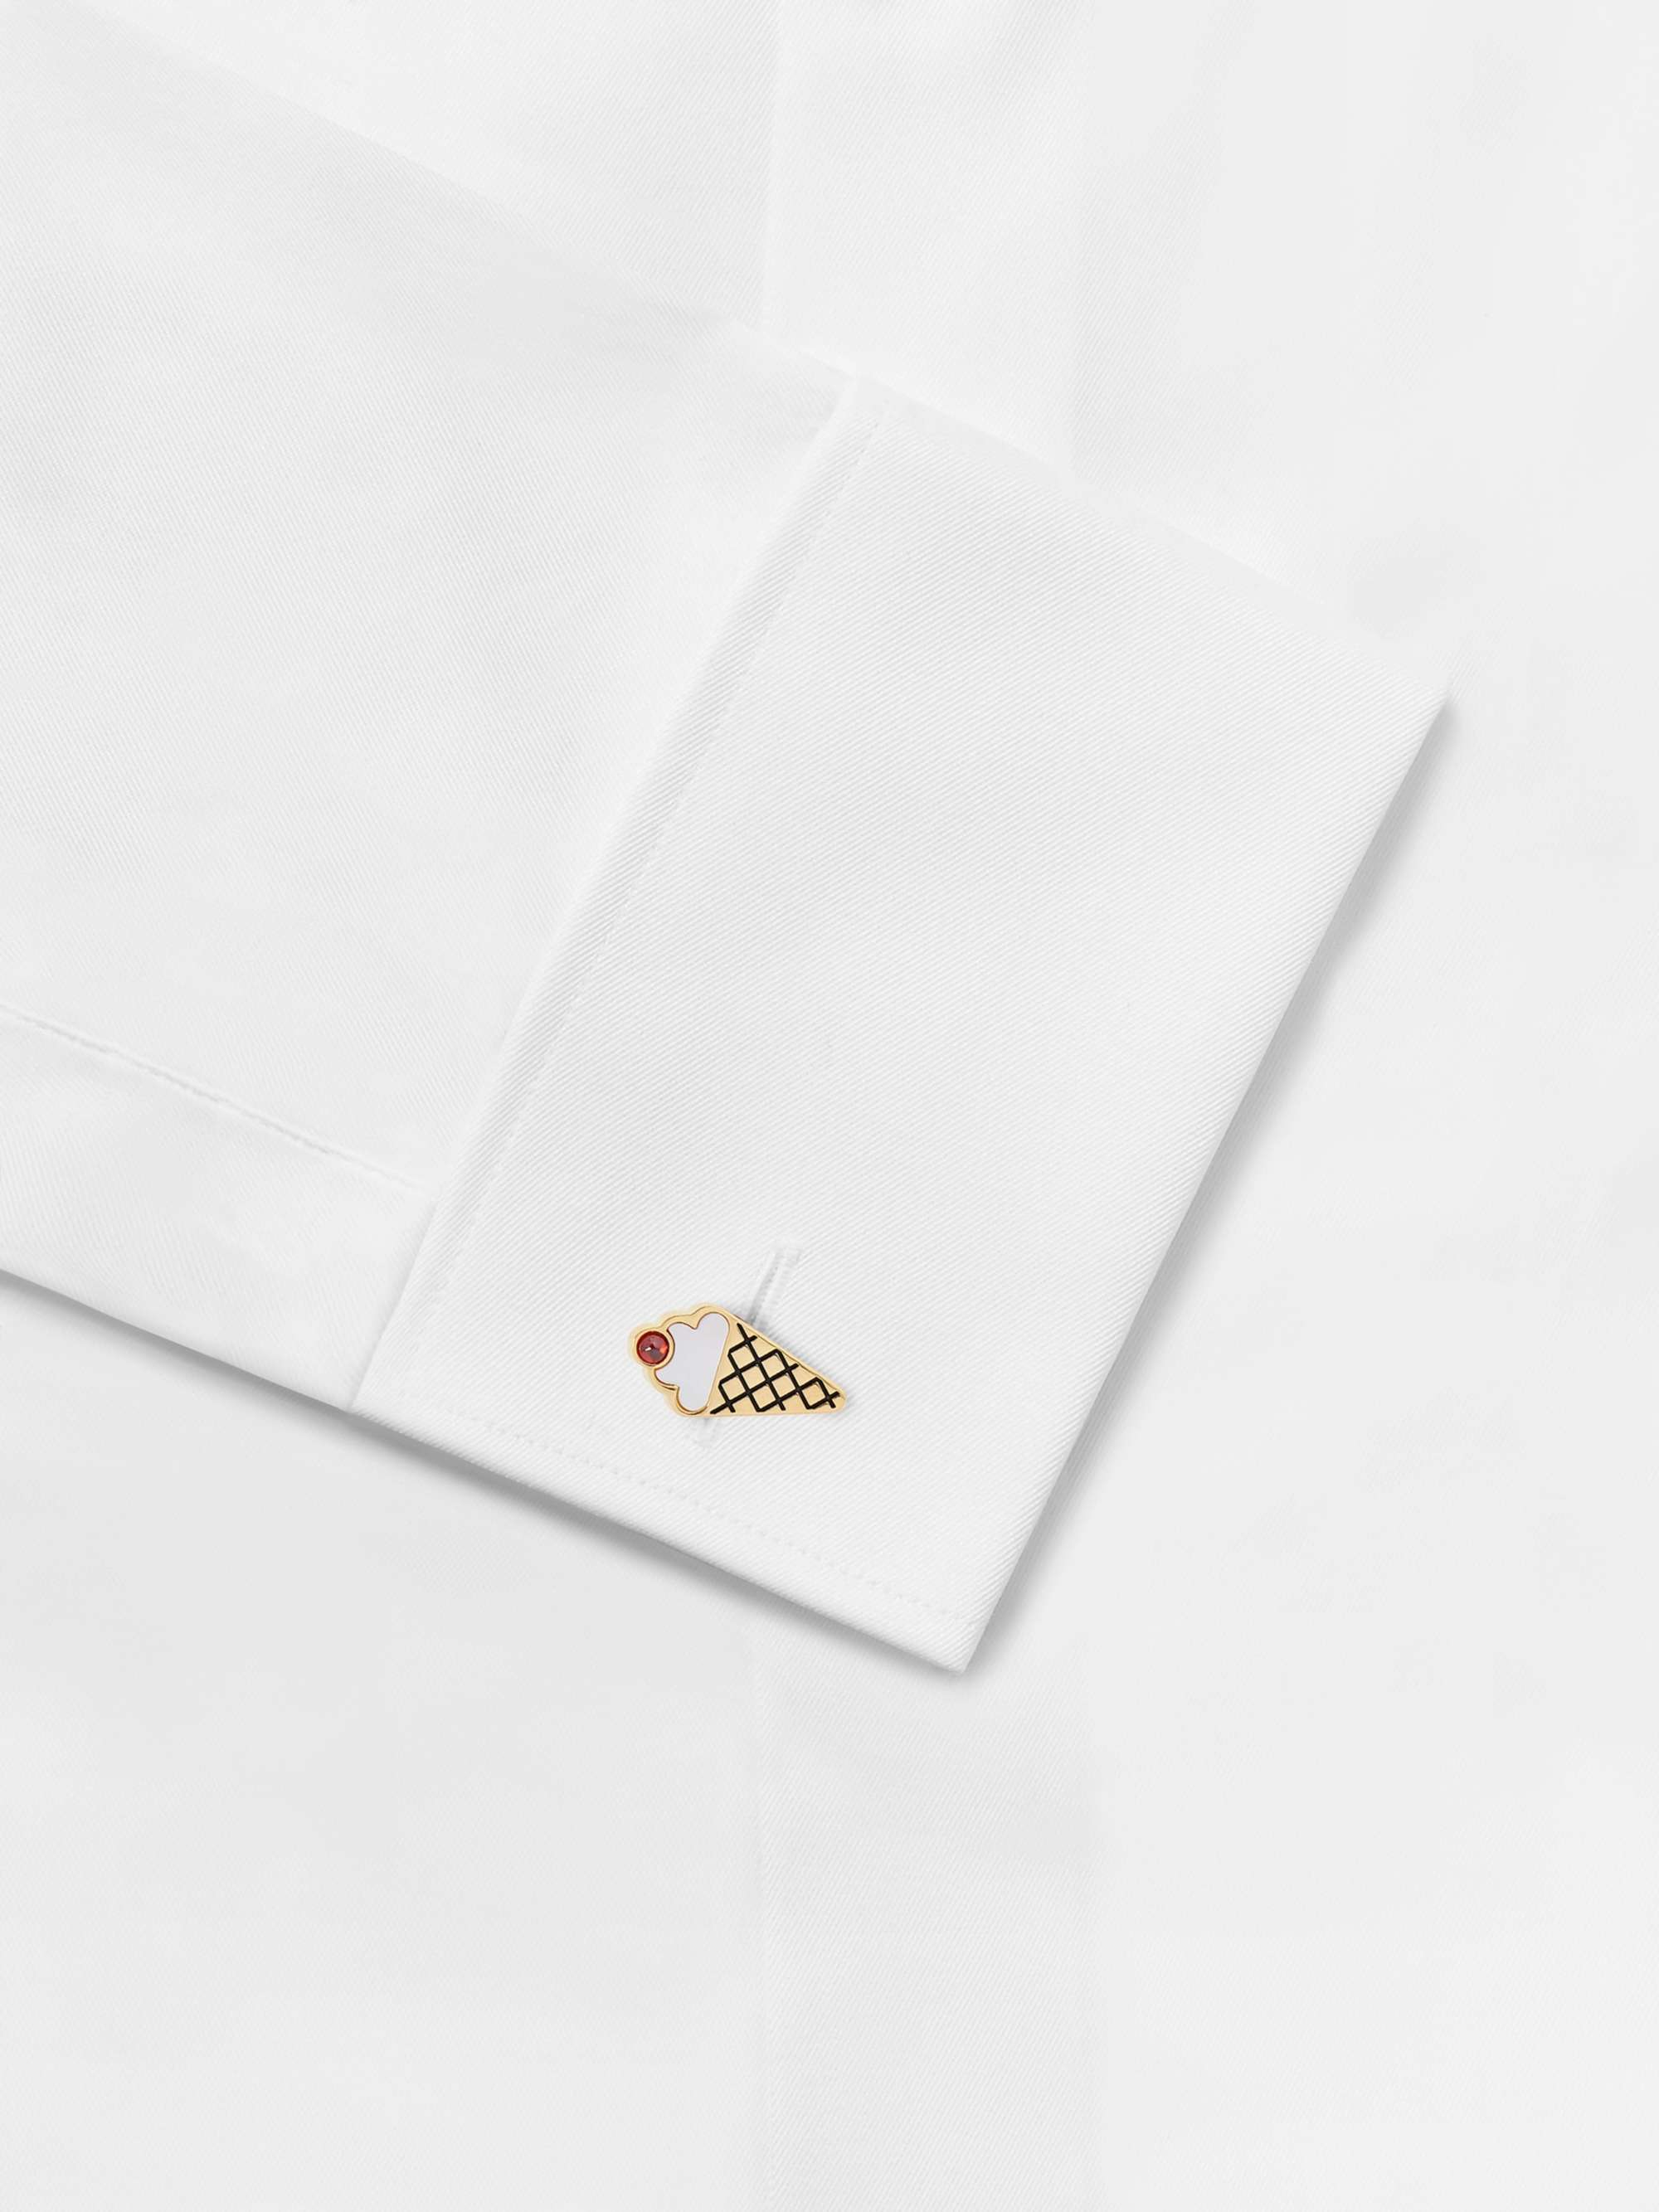 PAUL SMITH Gold-Tone, Enamel and Mother-of-Pearl Cufflinks